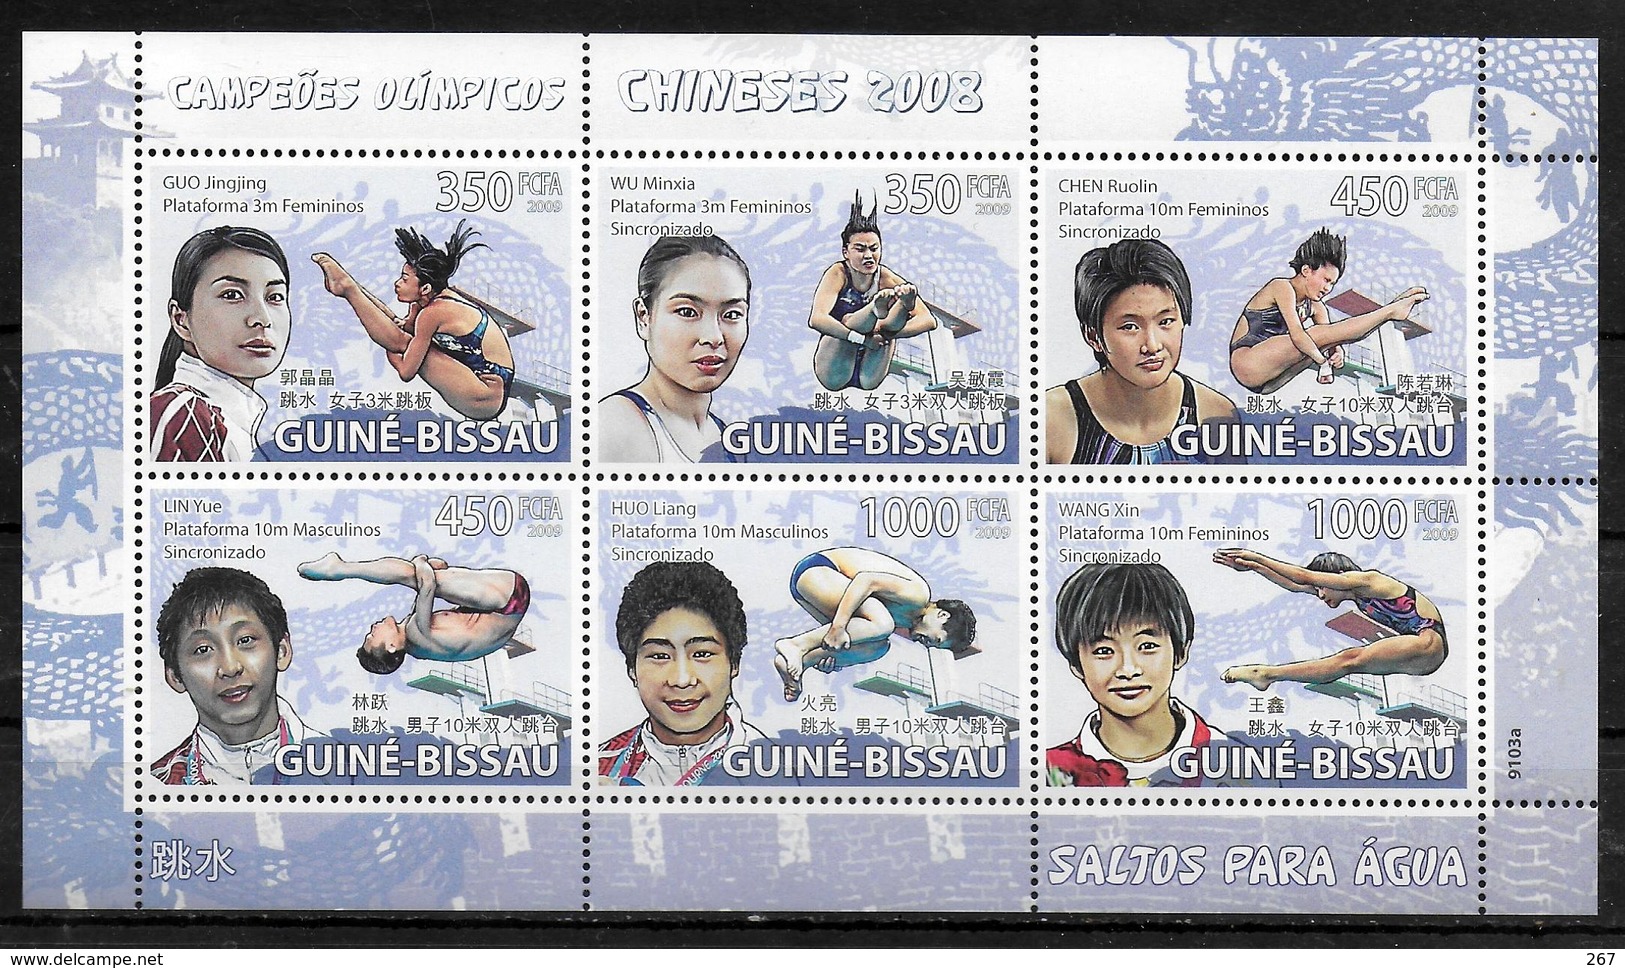 GUINEE BISSAU Feuillet  N° 2734/39  * * ( Cote 20e ) Jo 2008 Natation Plongeon  Champions Chinois - High Diving